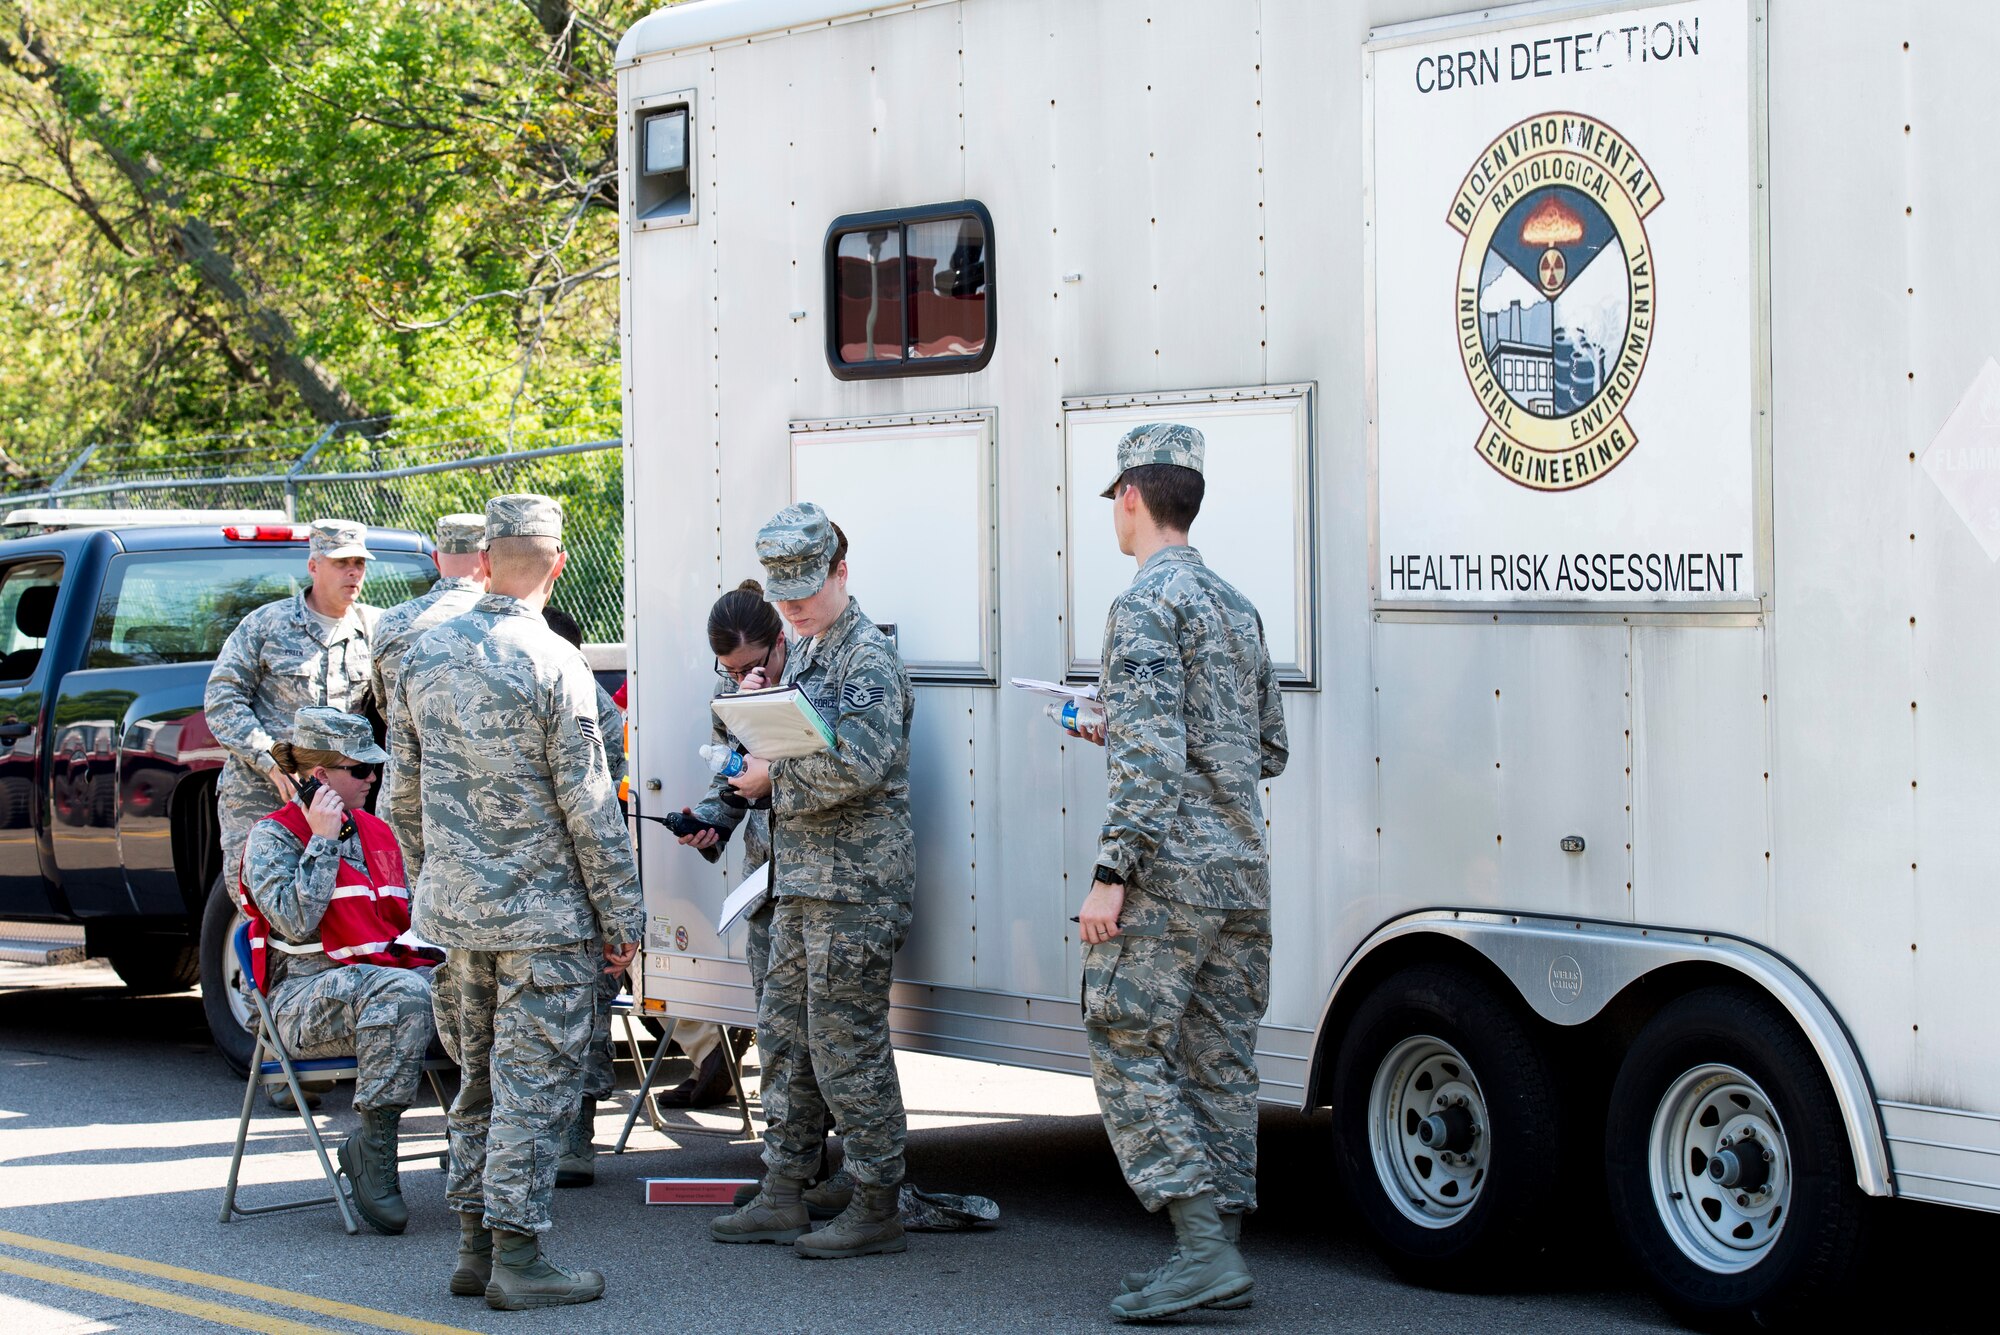 Wright-Patterson environmental team works together to assess potential environmental hazards and health risks in result of a tornado during the base exercise May 7 at WPAFB.